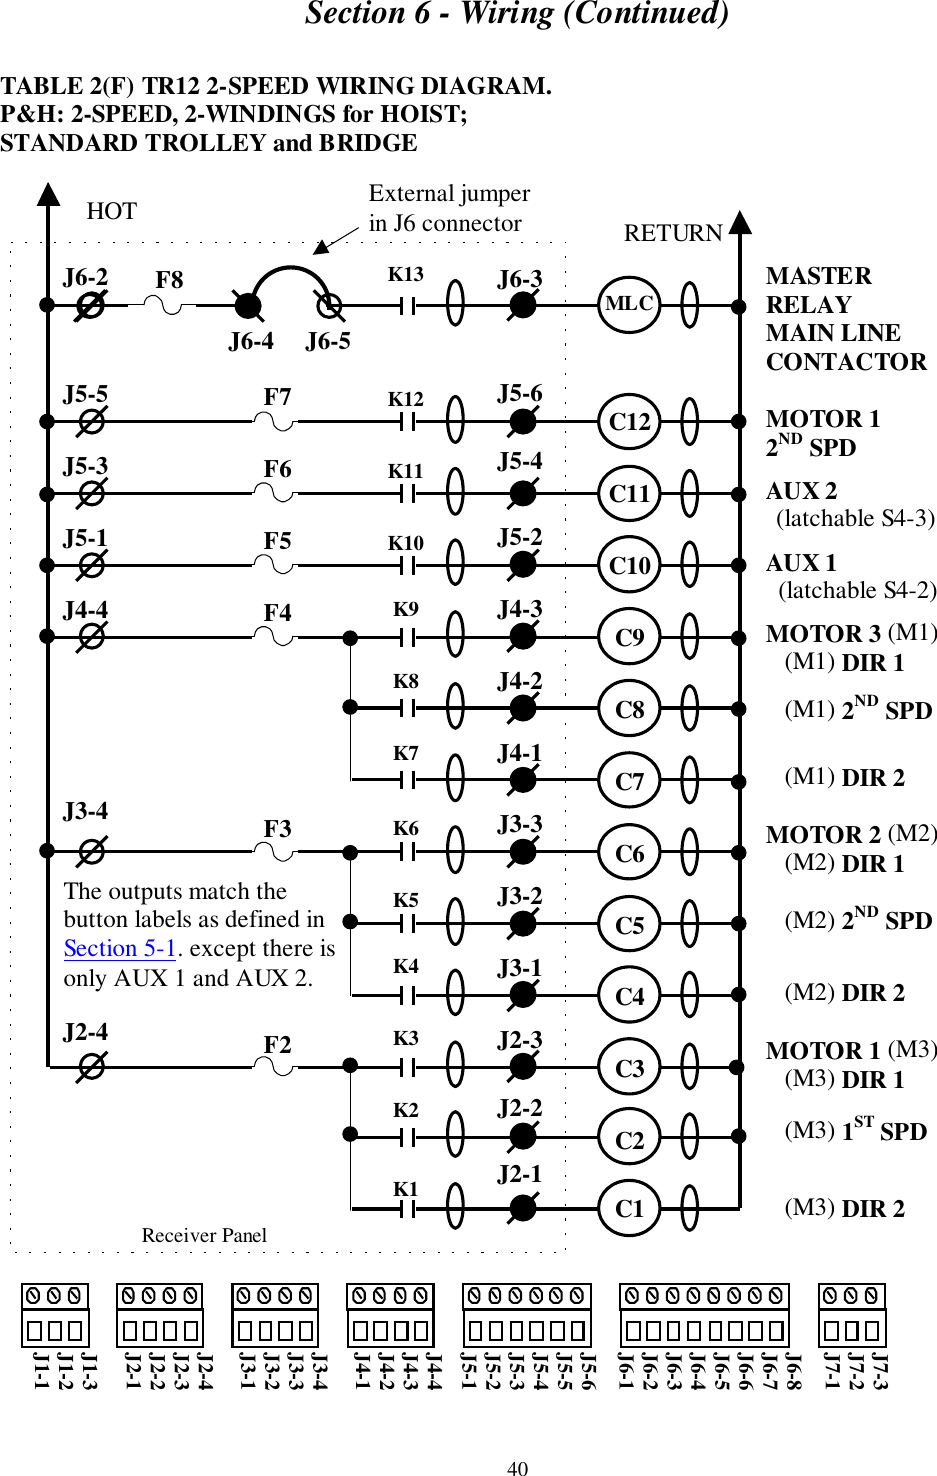 Section 6 - Wiring (Continued)40TABLE 2(F) TR12 2-SPEED WIRING DIAGRAM.P&amp;H: 2-SPEED, 2-WINDINGS for HOIST;STANDARD TROLLEY and BRIDGEMASTERRELAYMAIN LINECONTACTORMOTOR 12ND SPDAUX 2  (latchable S4-3)AUX 1  (latchable S4-2)MOTOR 3 (M1)   (M1) DIR 1   (M1) 2ND SPD   (M1) DIR 2MOTOR 2 (M2)   (M2) DIR 1   (M2) 2ND SPD   (M2) DIR 2MOTOR 1 (M3)   (M3) DIR 1   (M3) 1ST SPD   (M3) DIR 2     Receiver PanelJ6-2J5-5J5-3J5-1J4-4J3-4J2-4J6-3J5-6J5-4J5-2J4-3J4-2J4-1J3-3J3-2J3-1J2-3J2-2J2-1HOT RETURNK13K12K11K10K9K8K7K6K5K4K3K2K1MLCC12C11C10C9C8C7C6C5C4C3C2C1F7F6F5F4F3F2J7-3J7-2J7-1J6-8J6-7J6-6J6-5J6-4J6-3J6-2J6-1J5-6J5-5J5-4J5-3J5-2J5-1J4-4J4-3J4-2J4-1J3-4J3-3J3-2J3-1J2-4J2-3J2-2J2-1J1-3J1-2J1-1External jumperin J6 connectorJ6-4     J6-5F8The outputs match thebutton labels as defined inSection 5-1. except there isonly AUX 1 and AUX 2.